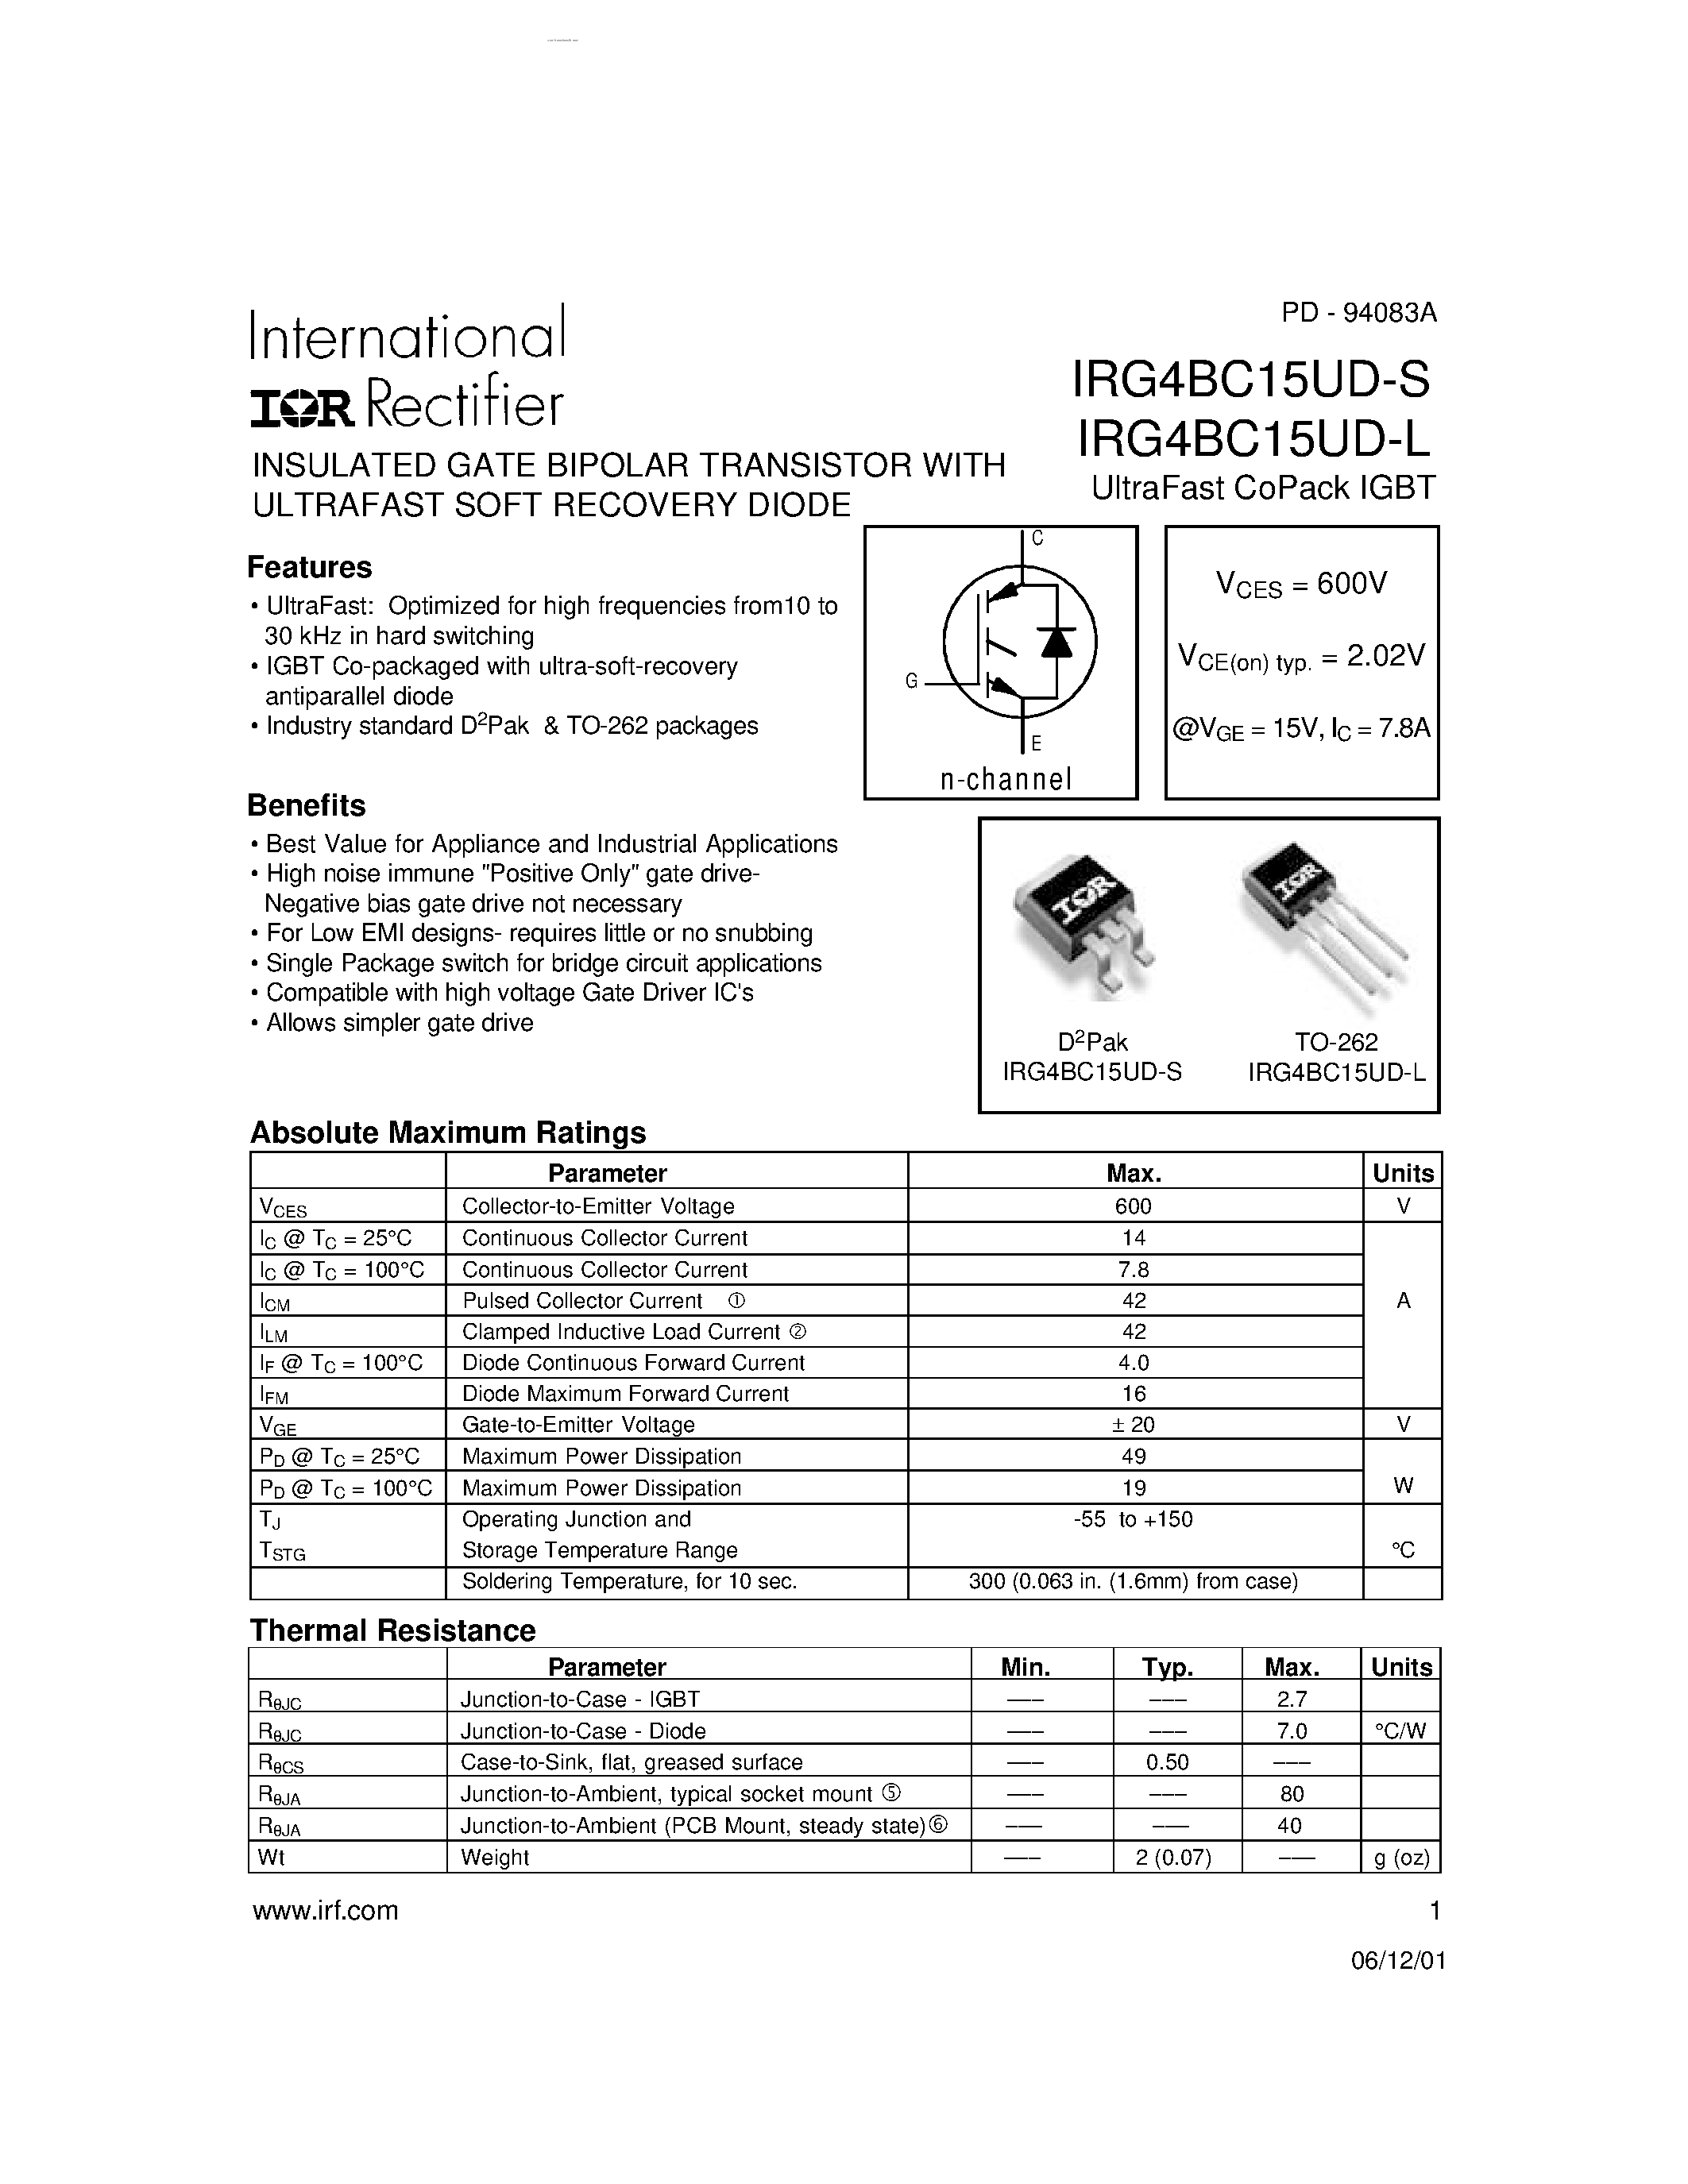 Datasheet IRG4BC15UD-L - (IRG4BC15UD-L/-S) INSULATED GATE BIPOLAR TRANSISTOR page 1